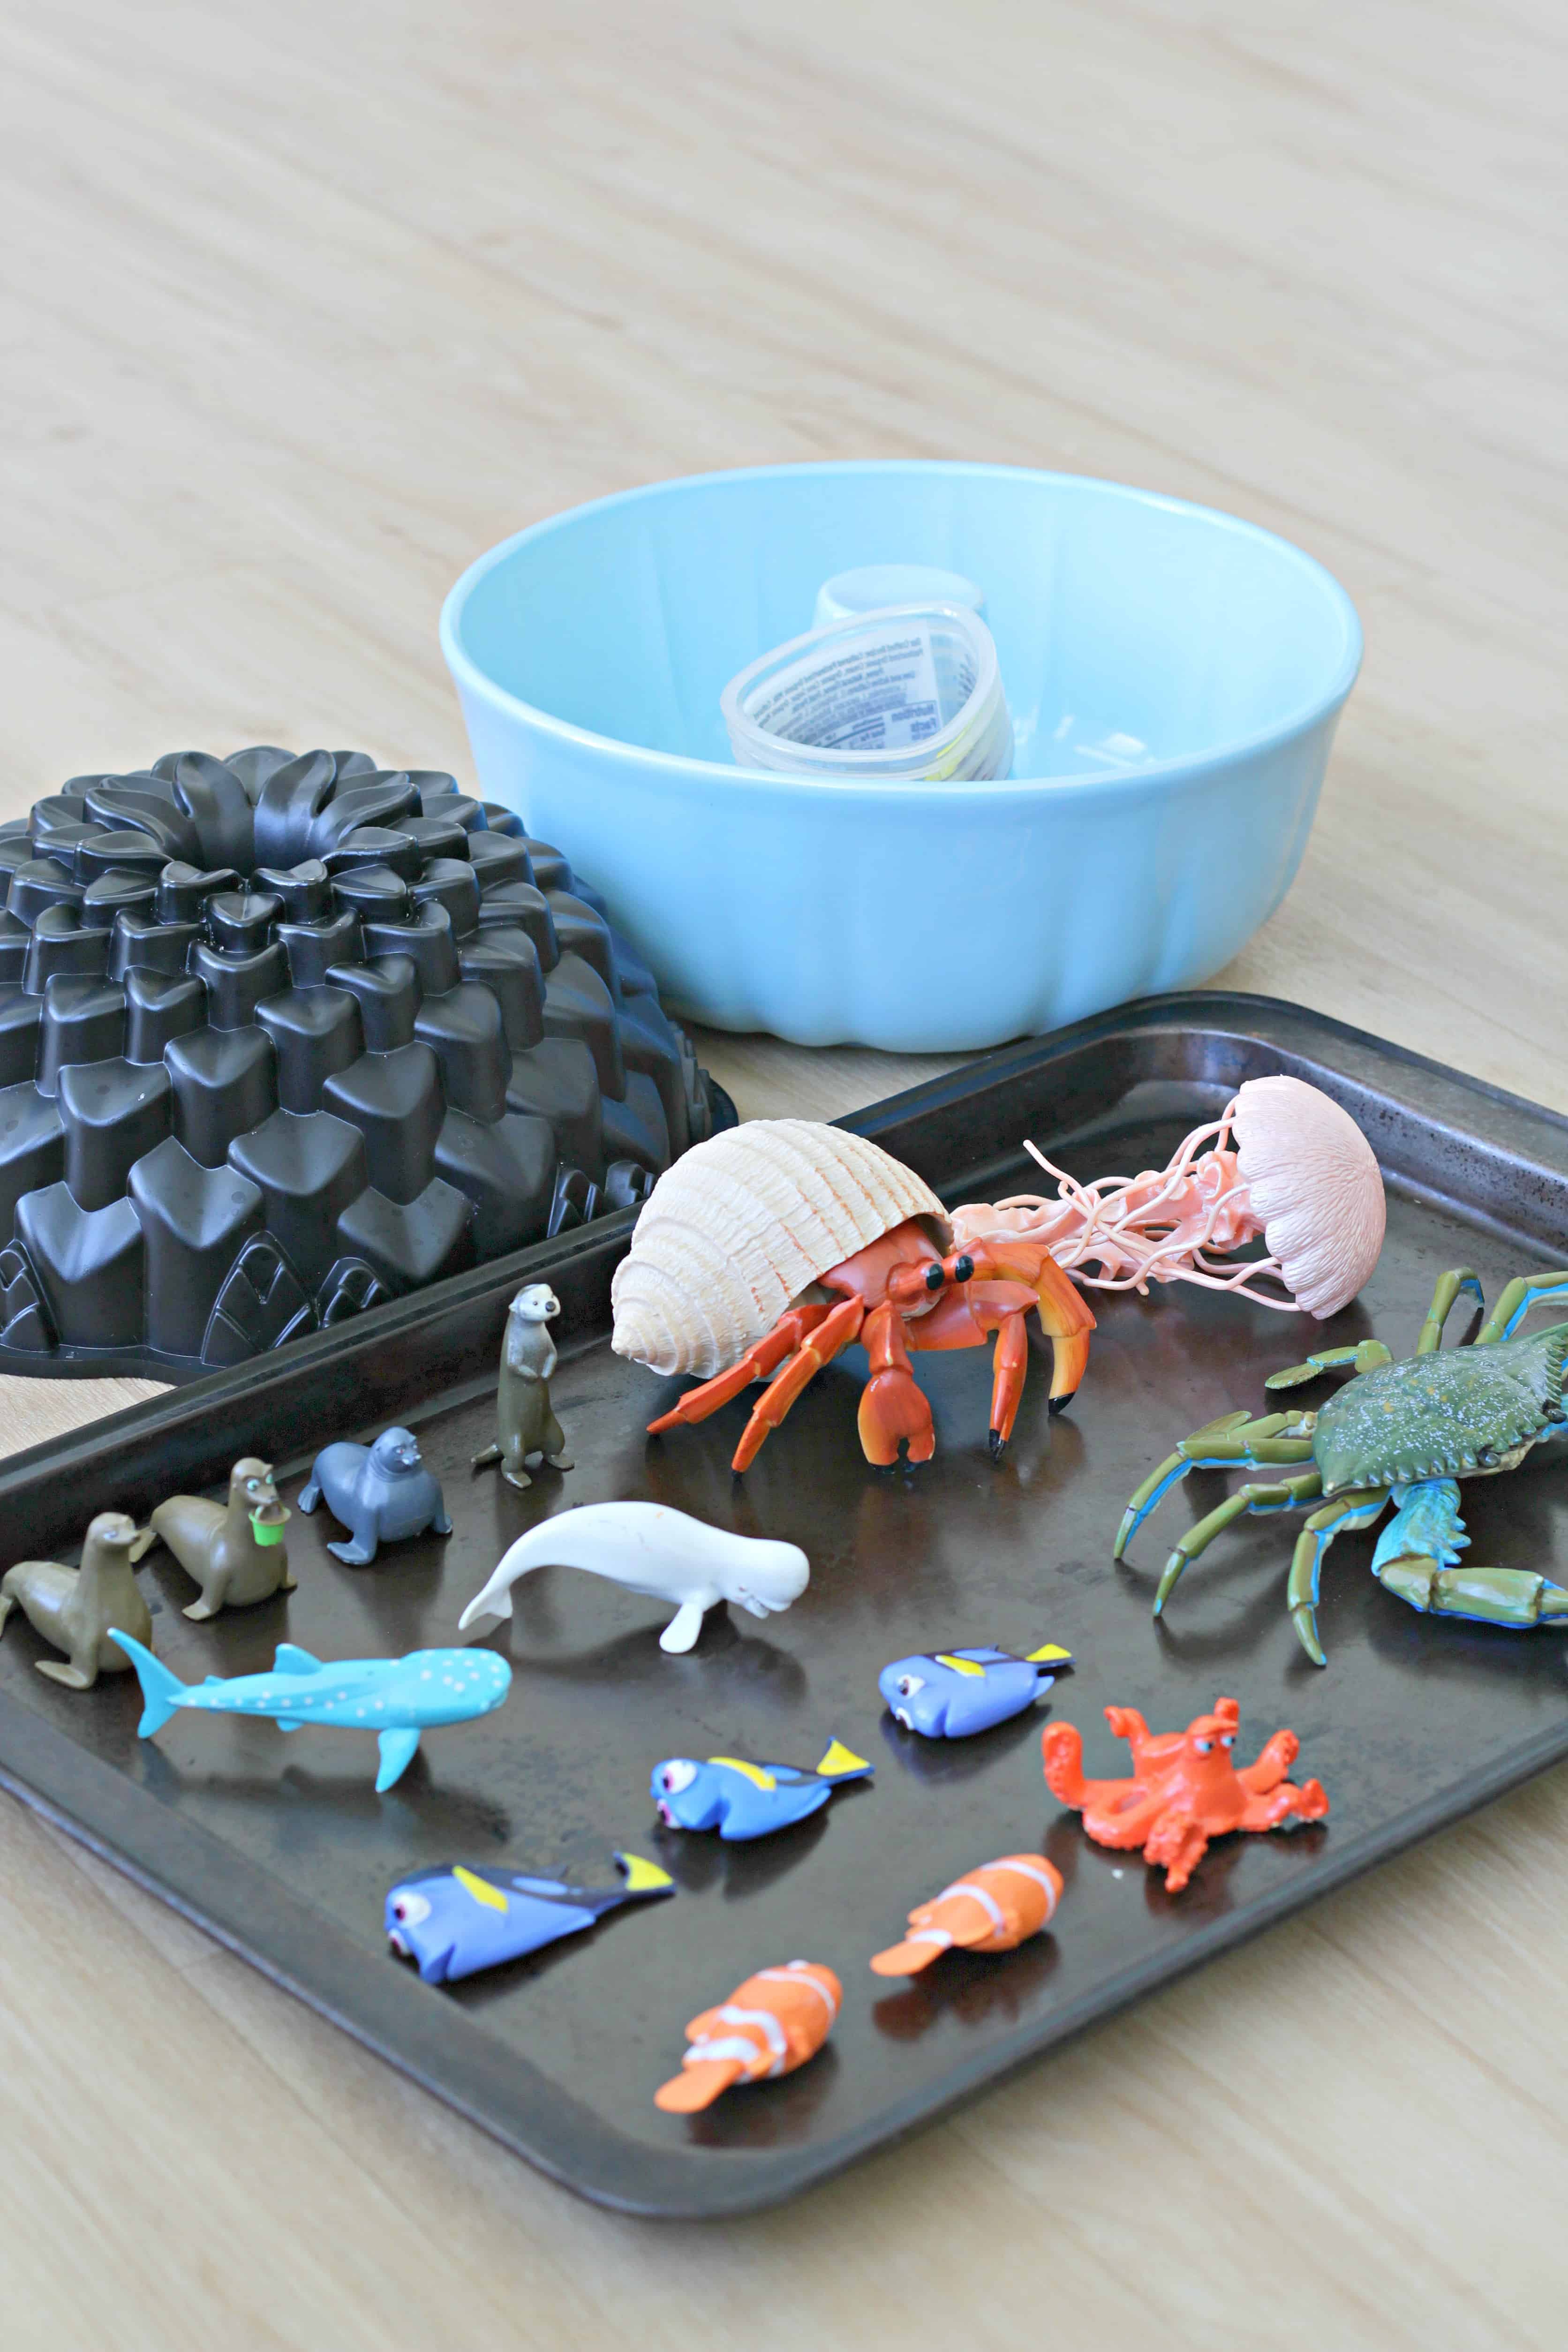 Plastic sea creatures on a pan with cake pans beside them